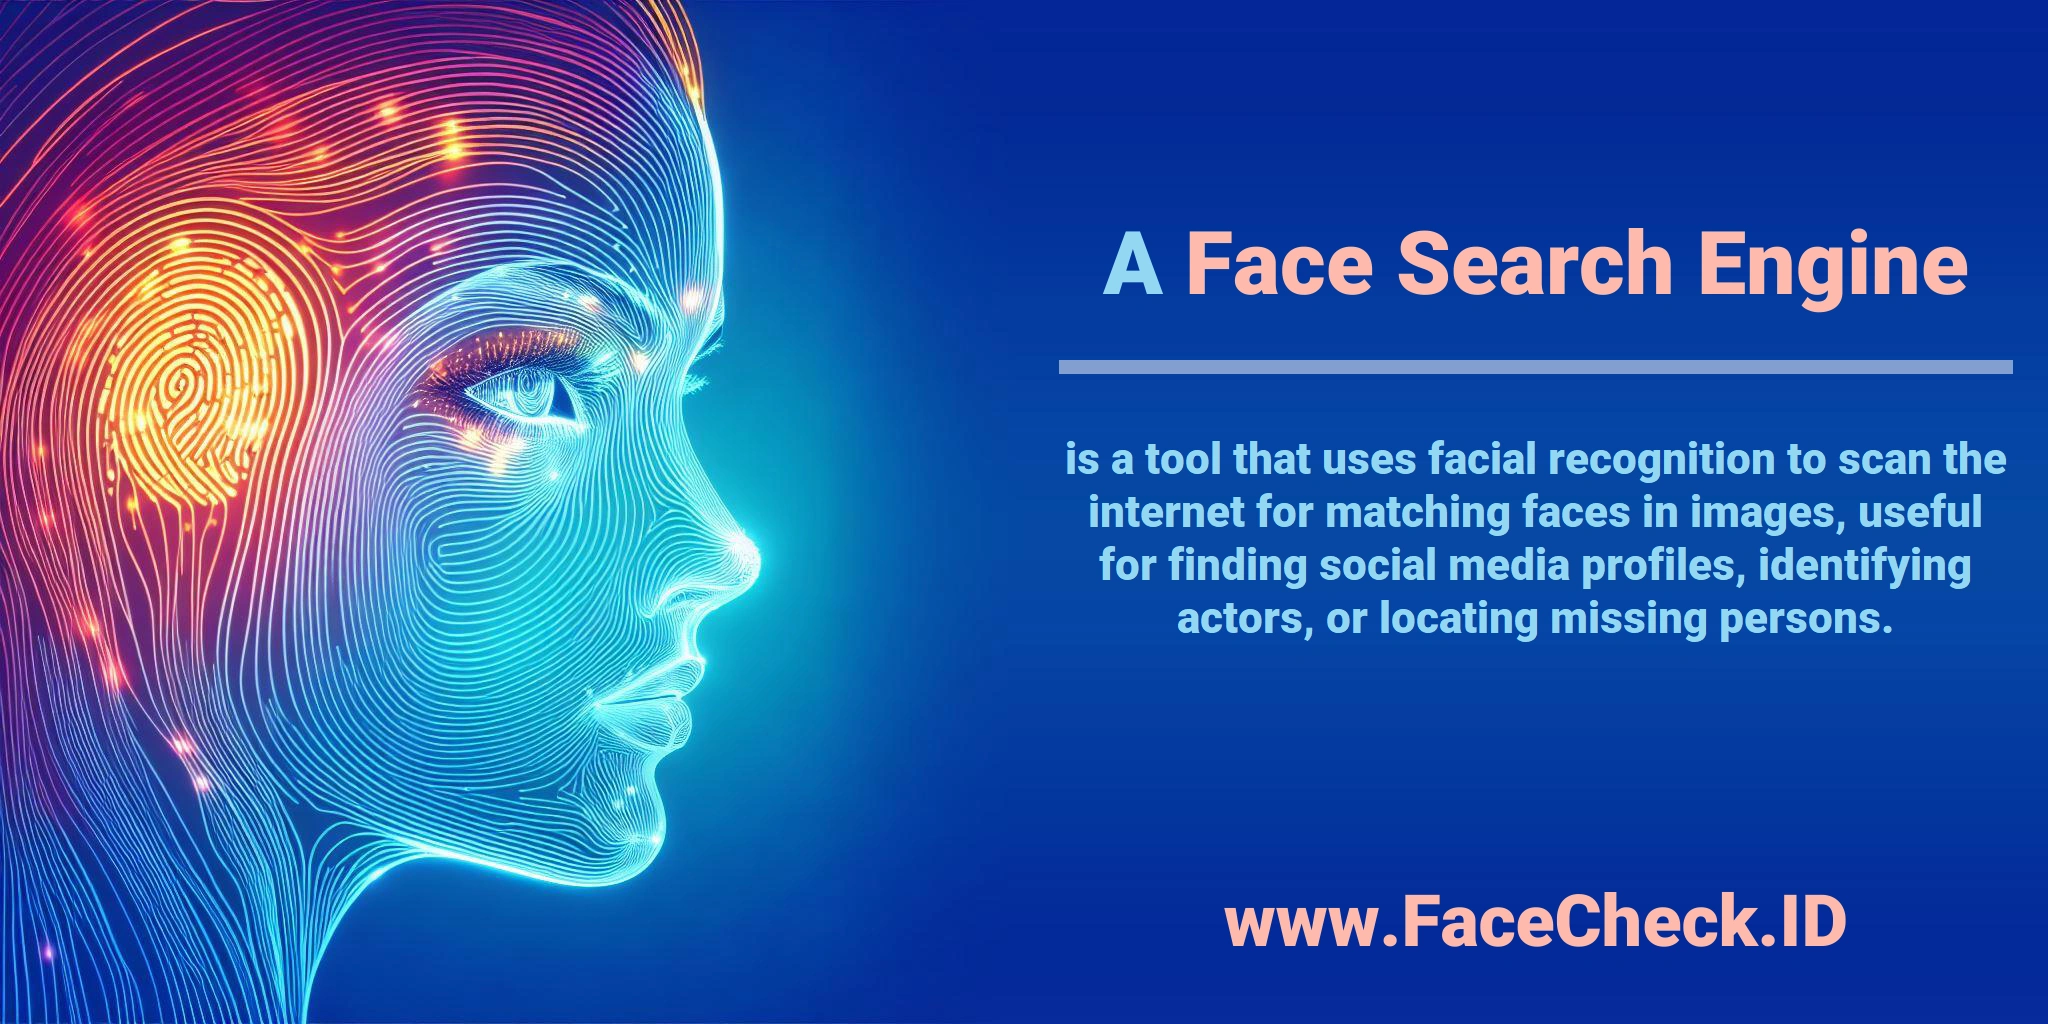 A <b>Face Search Engine</b> is a tool that uses facial recognition to scan the internet for matching faces in images, useful for finding social media profiles, identifying actors, or locating missing persons.